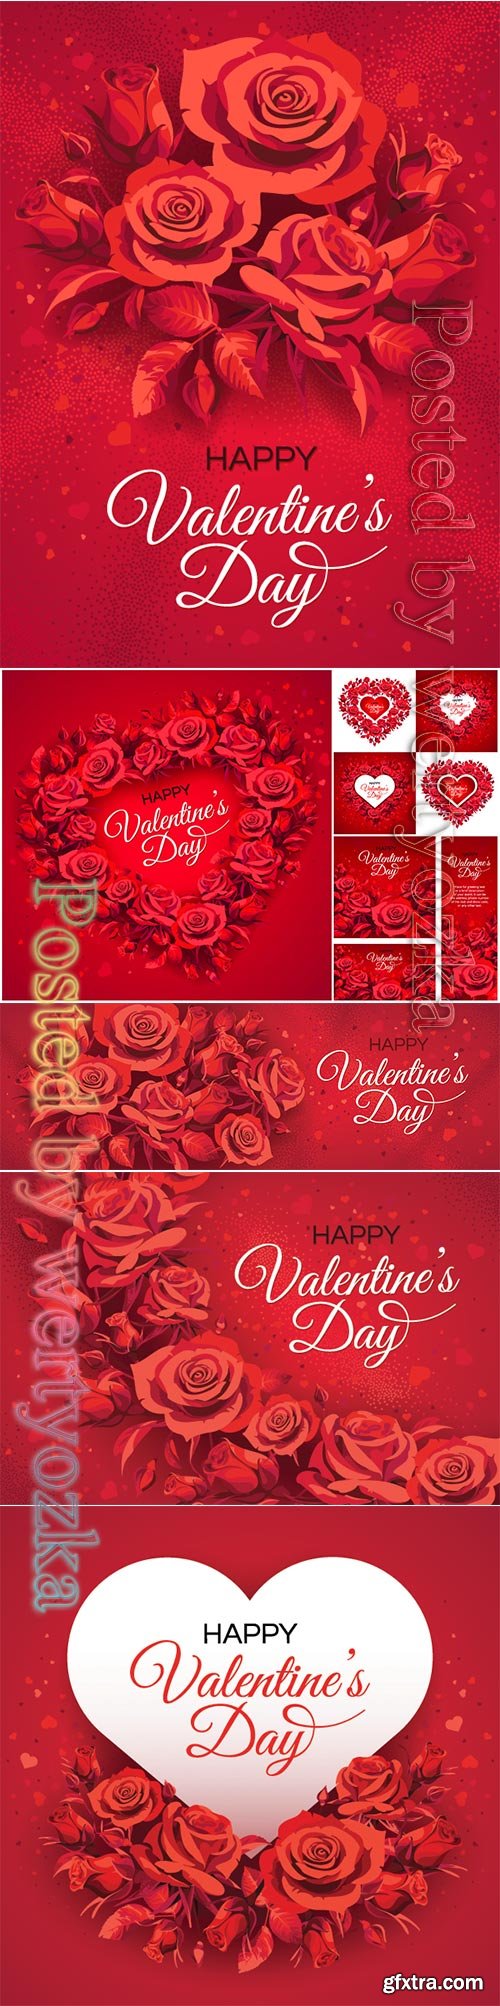 Valentine's Day greeting card templates with red roses